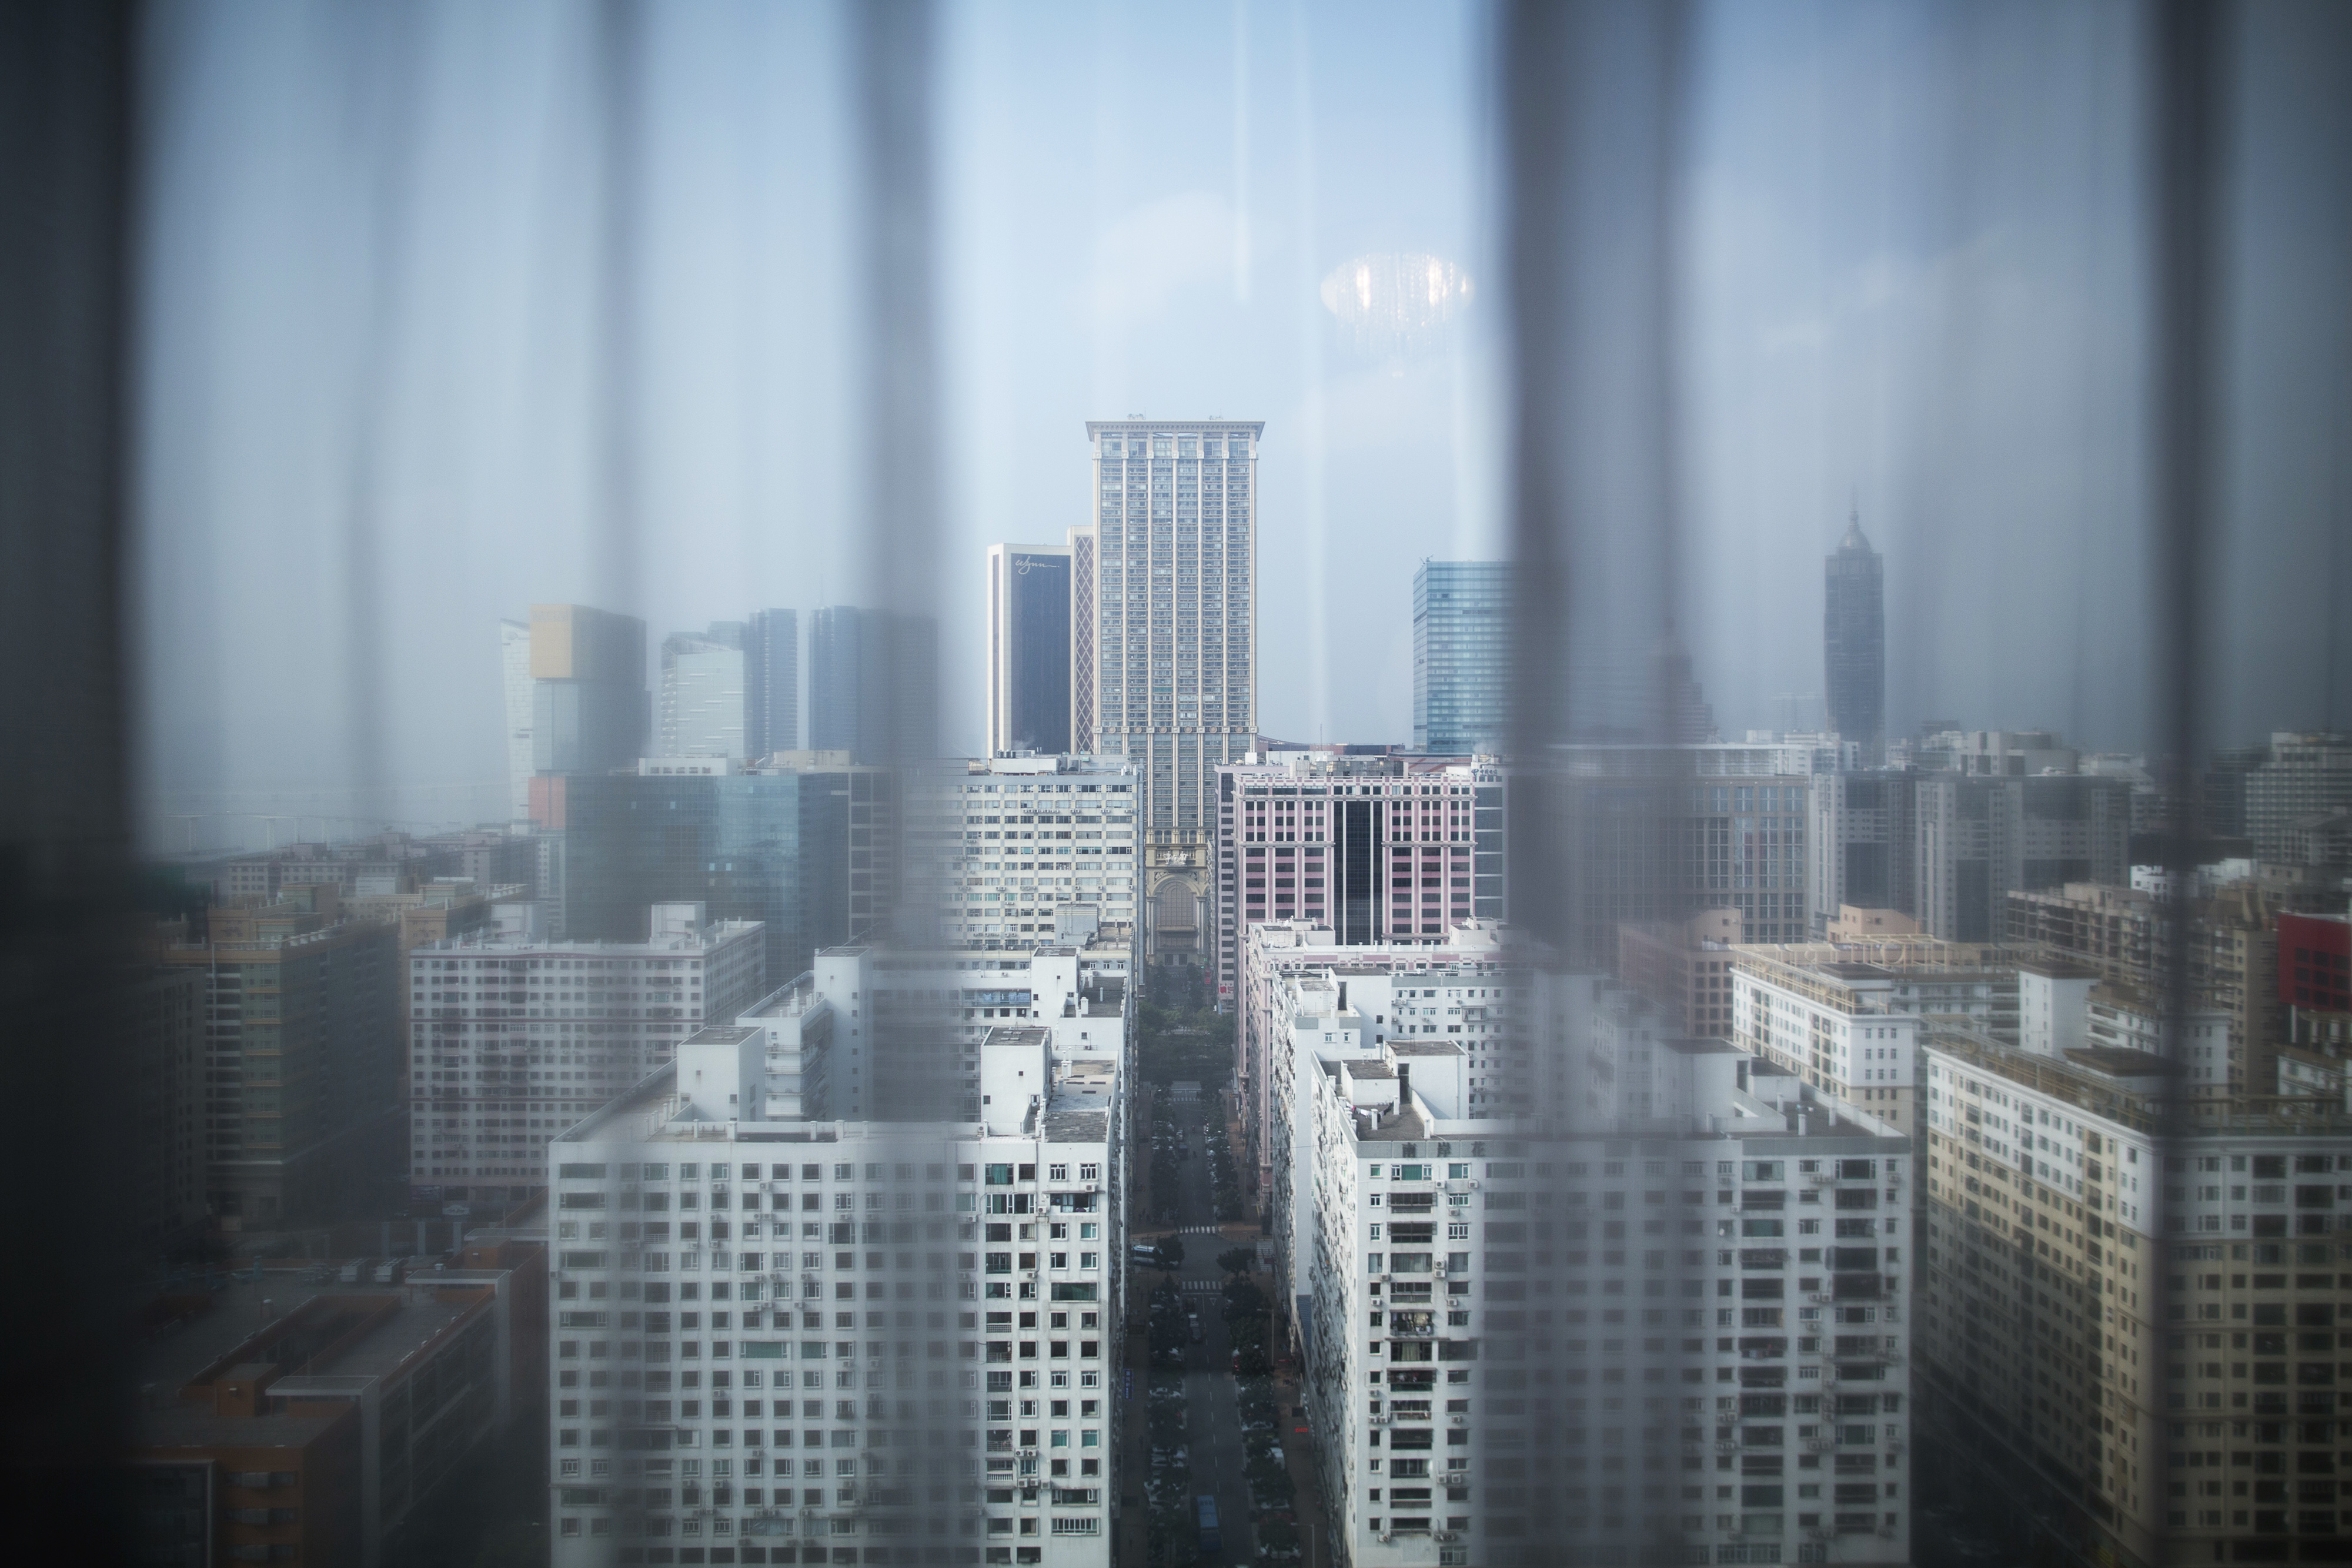 Macau, a well-oiled machine to launder the proceeds of corrupt Chinese officials, has seen its growth tamed. Photo: Bloomberg